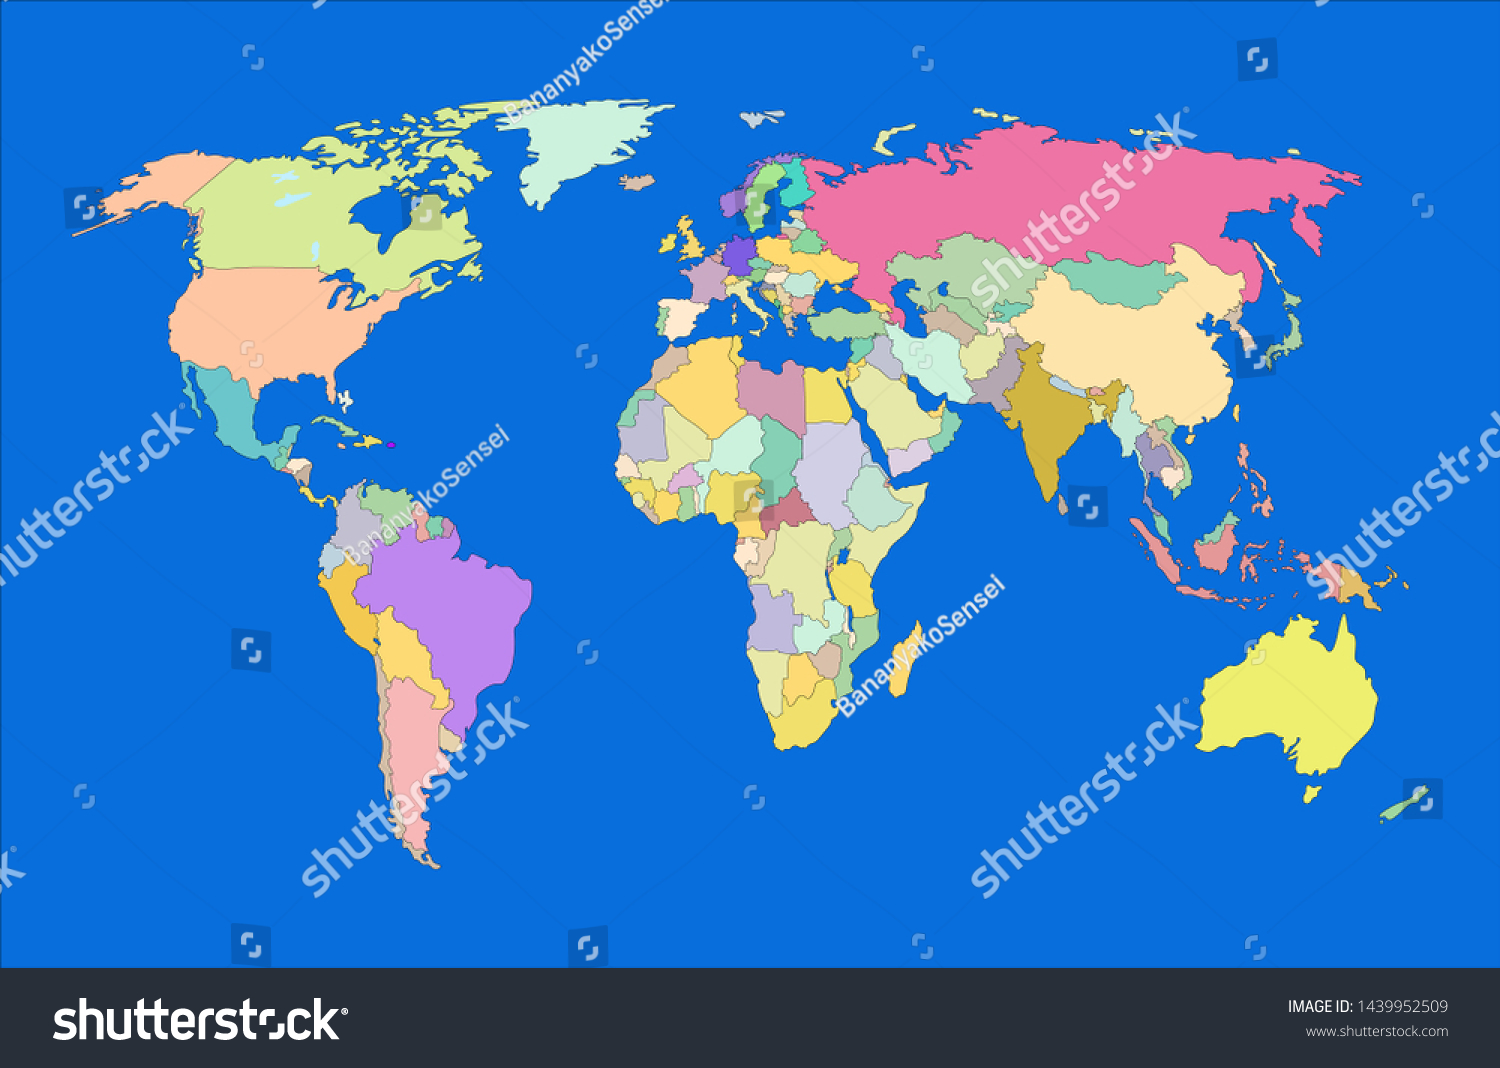 Vector Colorful World Map Political Map Stock Vector Royalty Free 1439952509 3667